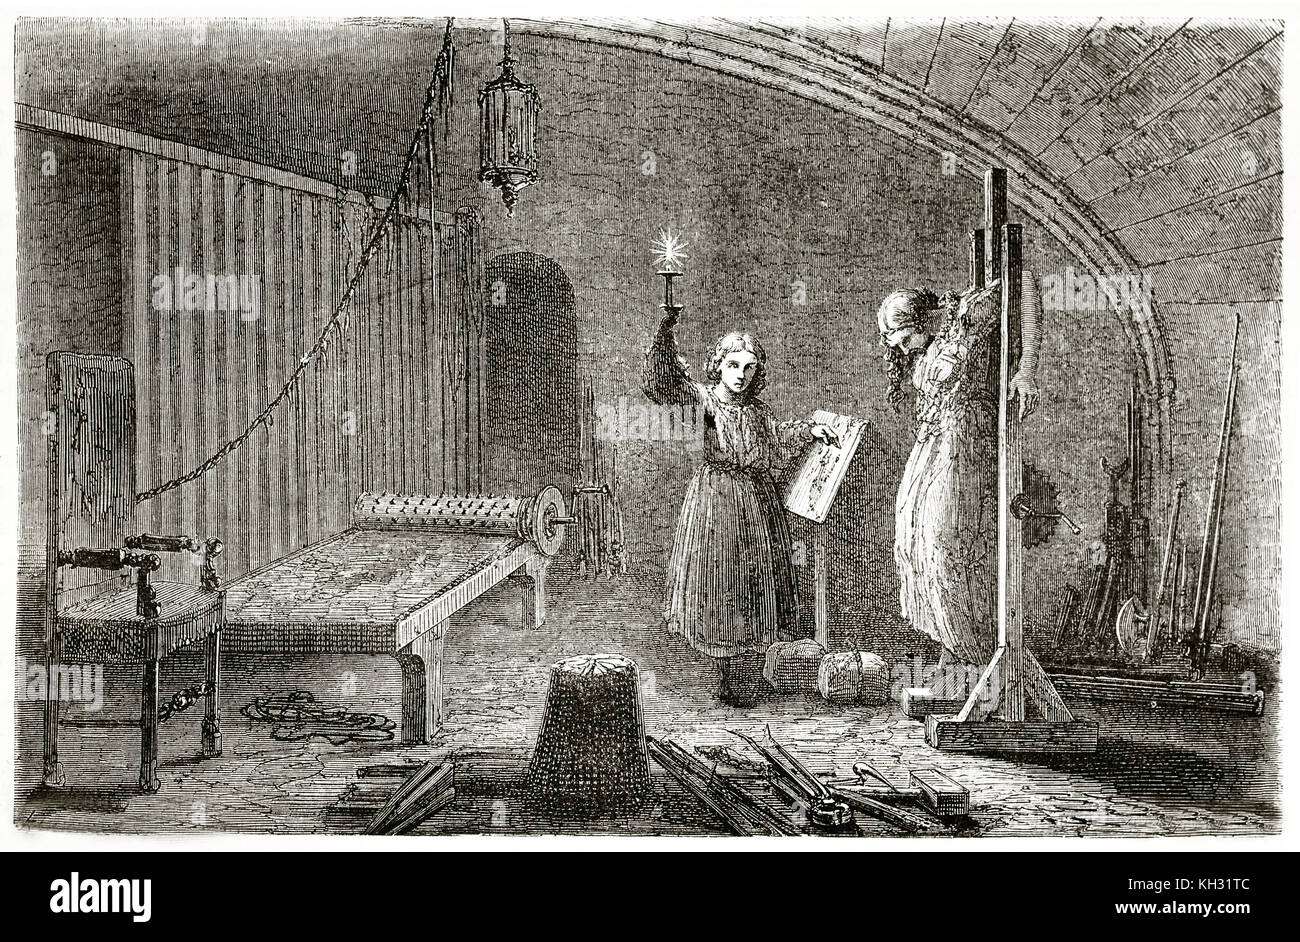 Old view of the Torture chamber in Regensburg city hall, Germany. By Lancelot, publ. on le Tour du Monde, Paris, 1863 Stock Photo